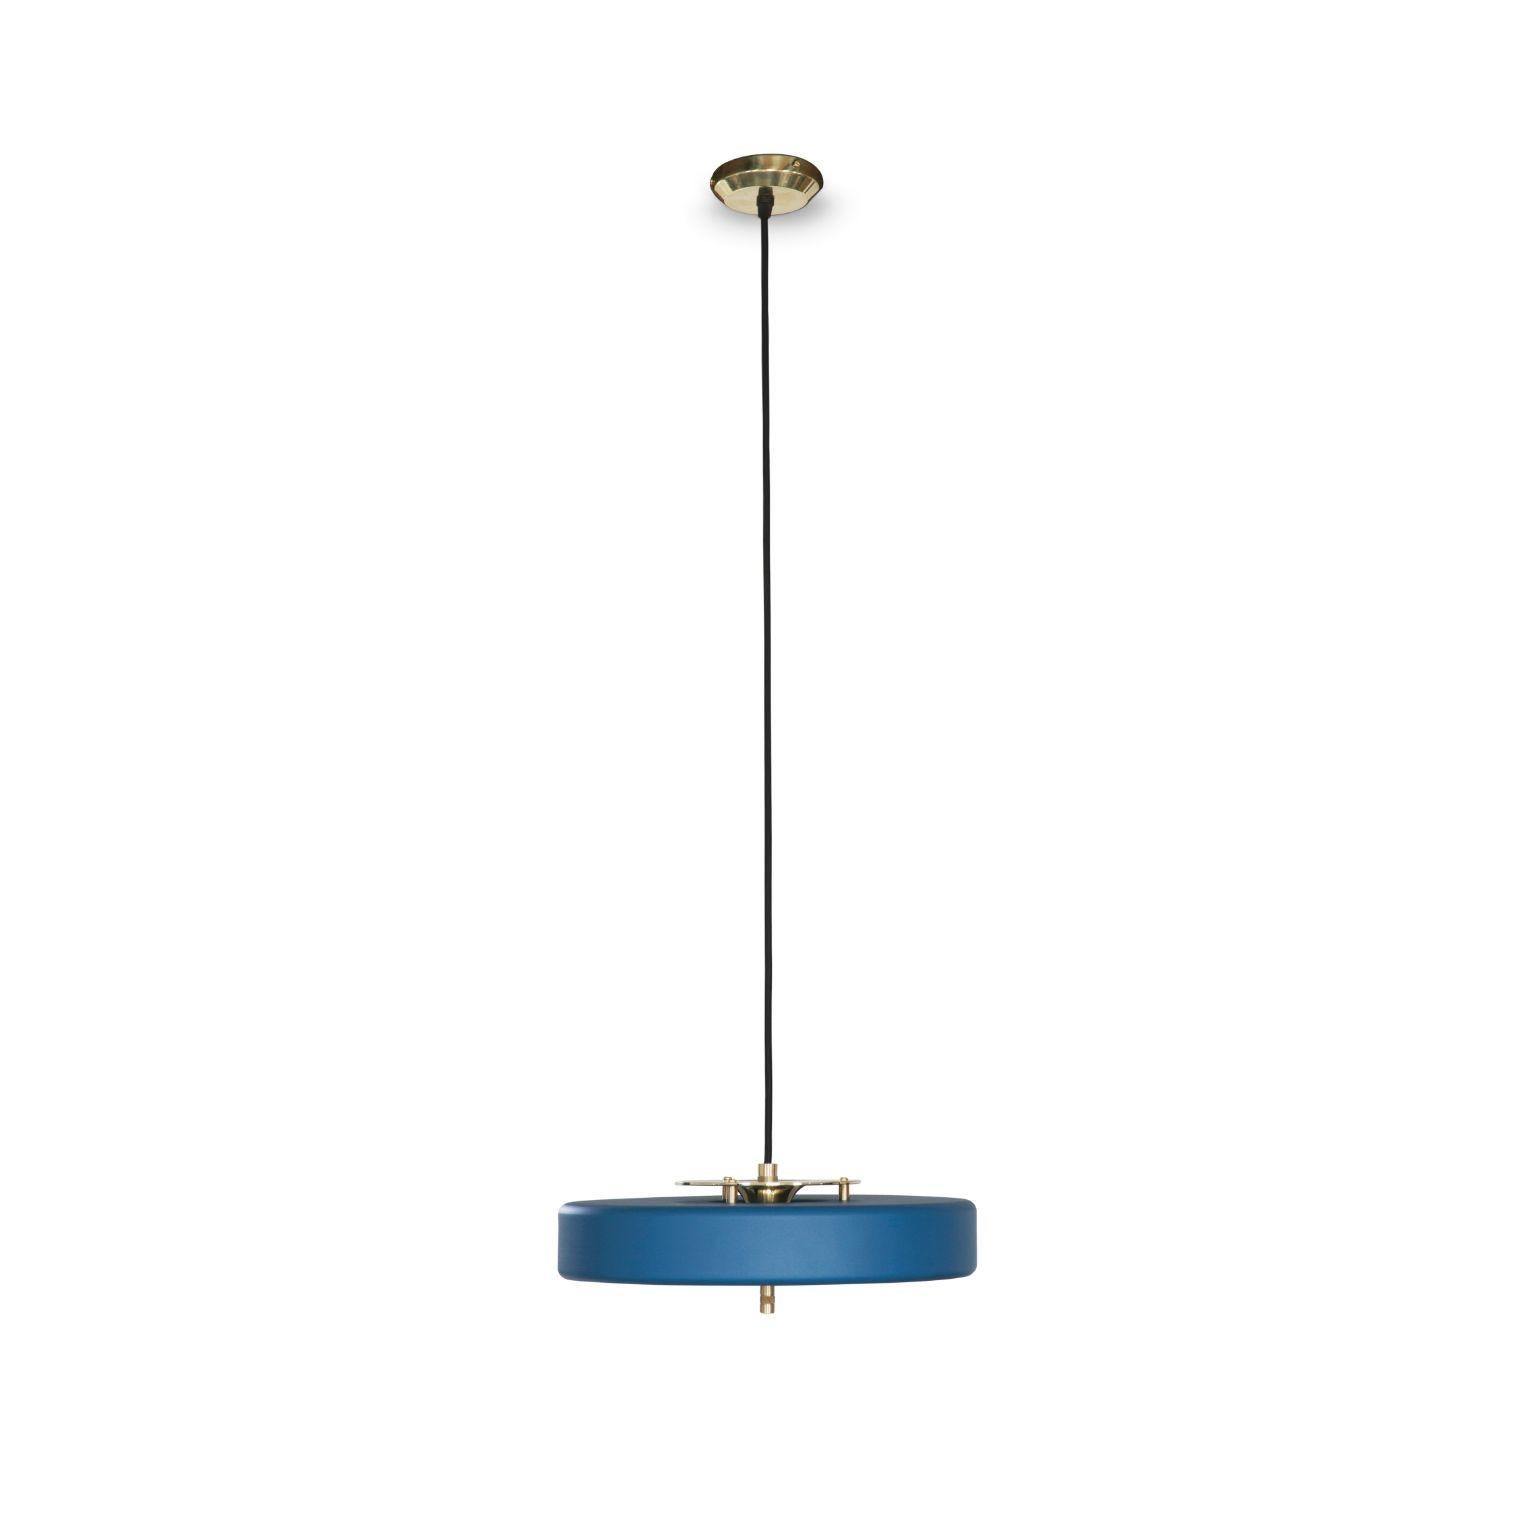 Revolve pendant light - Brushed brass - Blue by Bert Frank
Dimensions: 60-200 x 35 x 11 cm
Materials: Brass, steel

Also available in polished brass

When Adam Yeats and Robbie Llewellyn founded Bert Frank in 2013 it was a meeting of minds and the